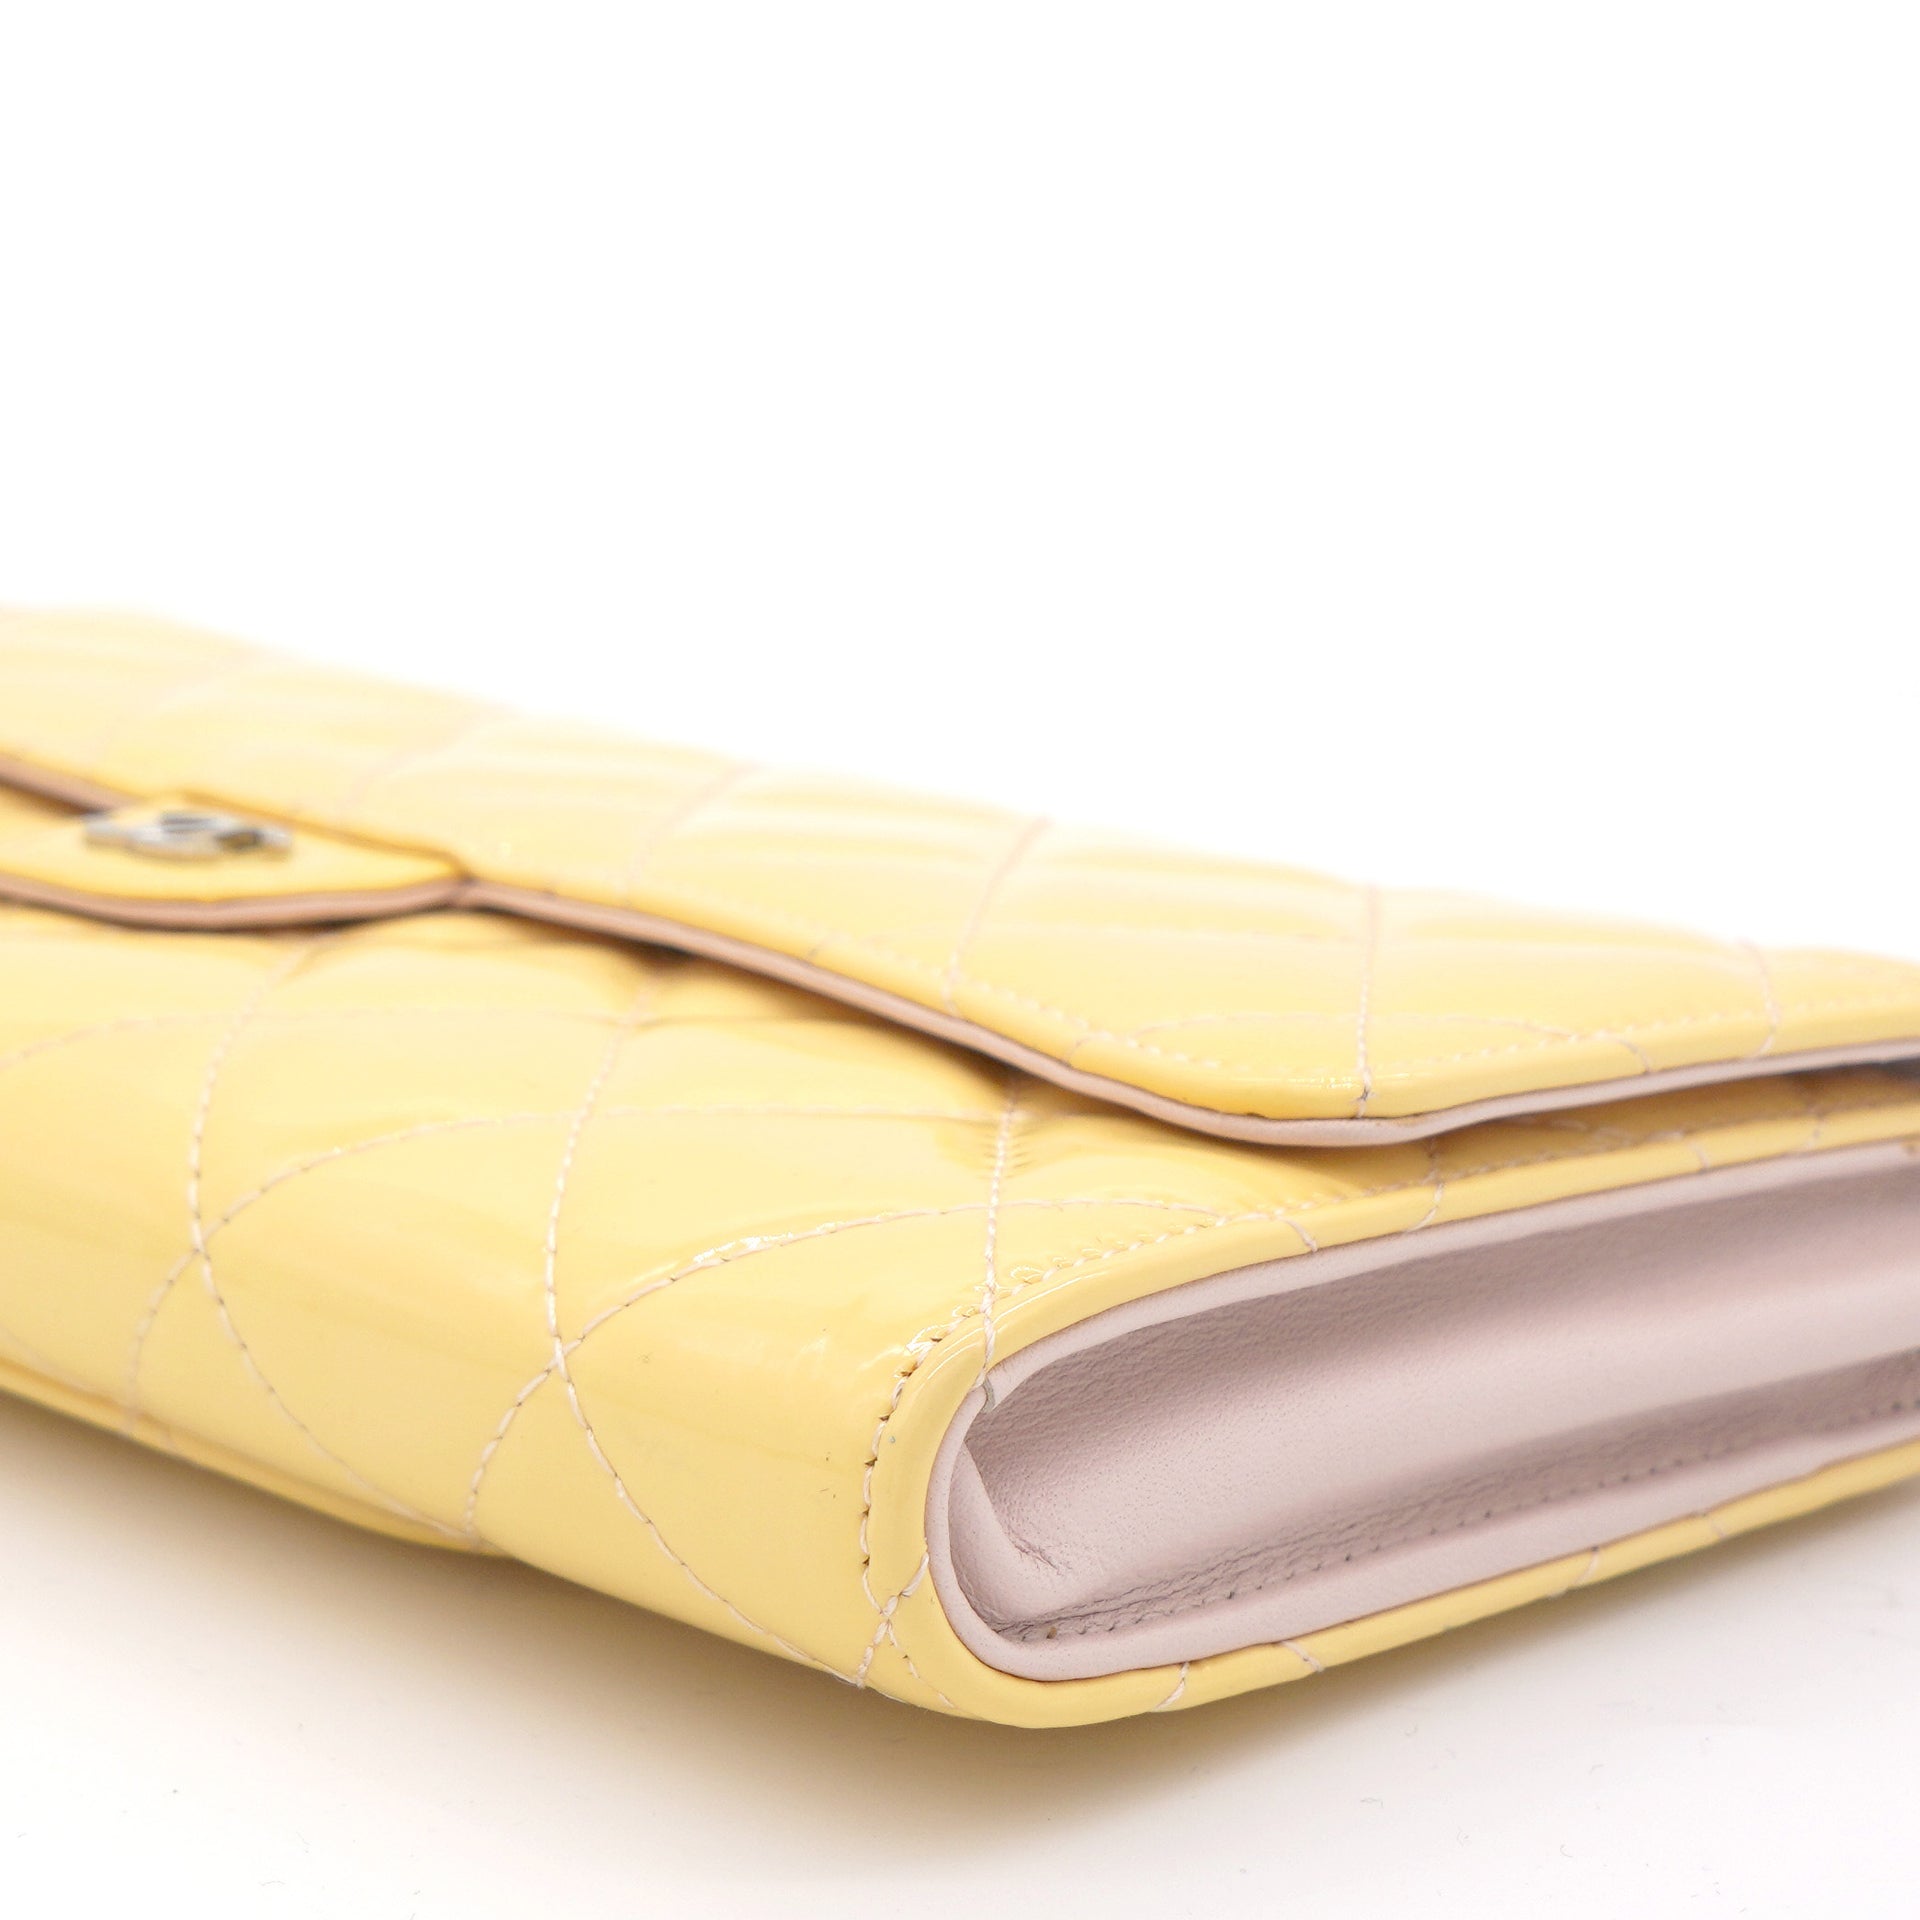 Yellow Patent Leather Classic Continental Multi Pochette Wallet